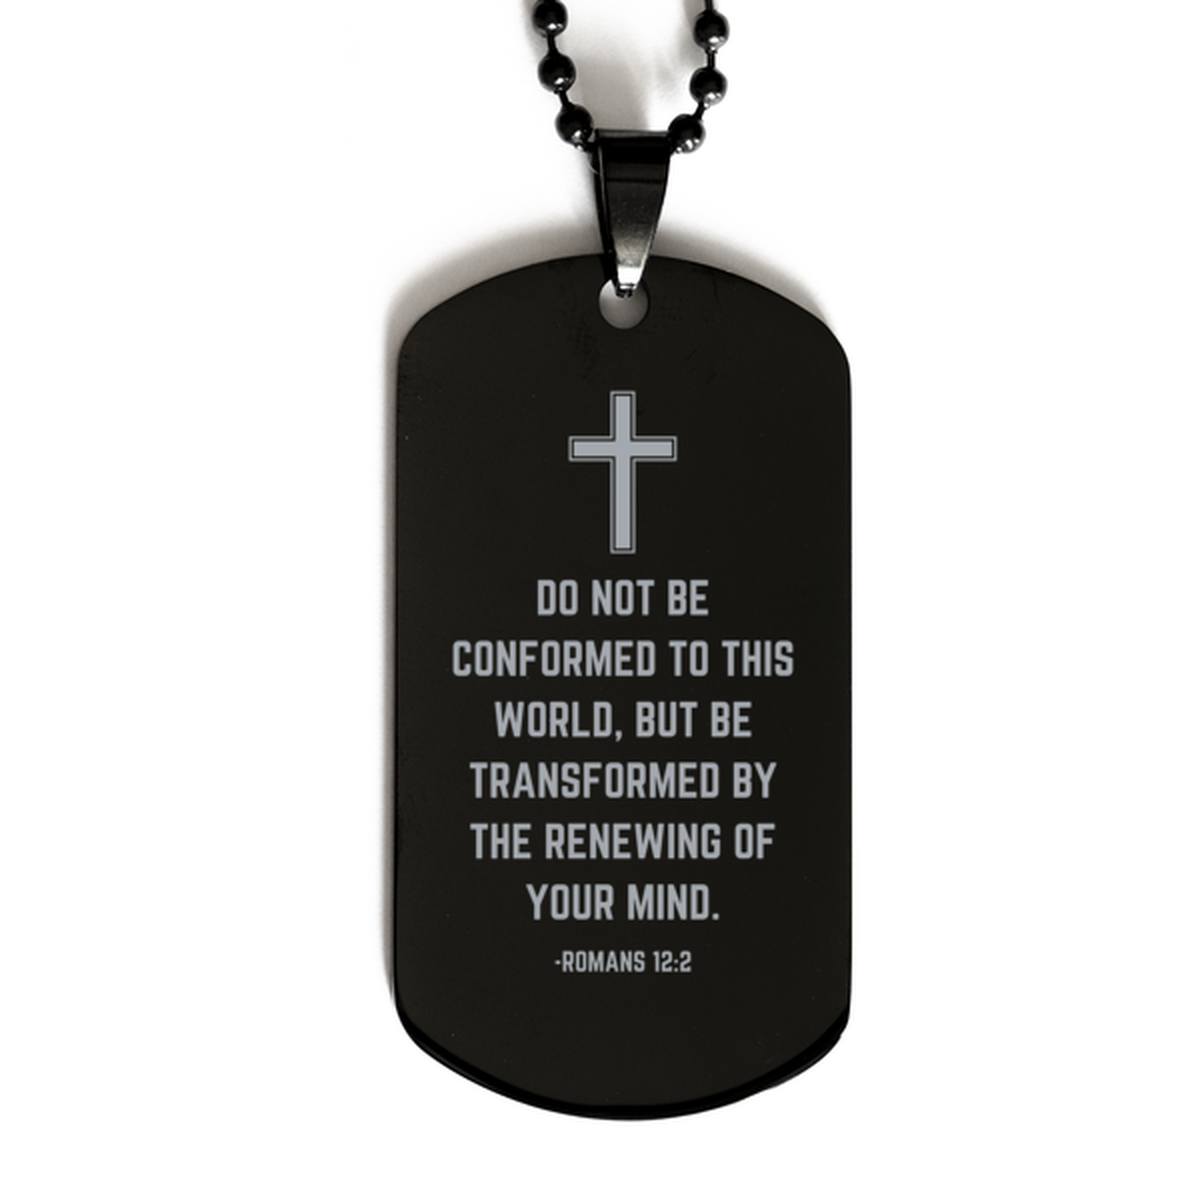 Baptism Gifts For Teenage Boys Girls, Christian Bible Verse Black Dog Tag, Do not be conformed to this world, Confirmation Gifts, Bible Verse Necklace for Son, Godson, Grandson, Nephew